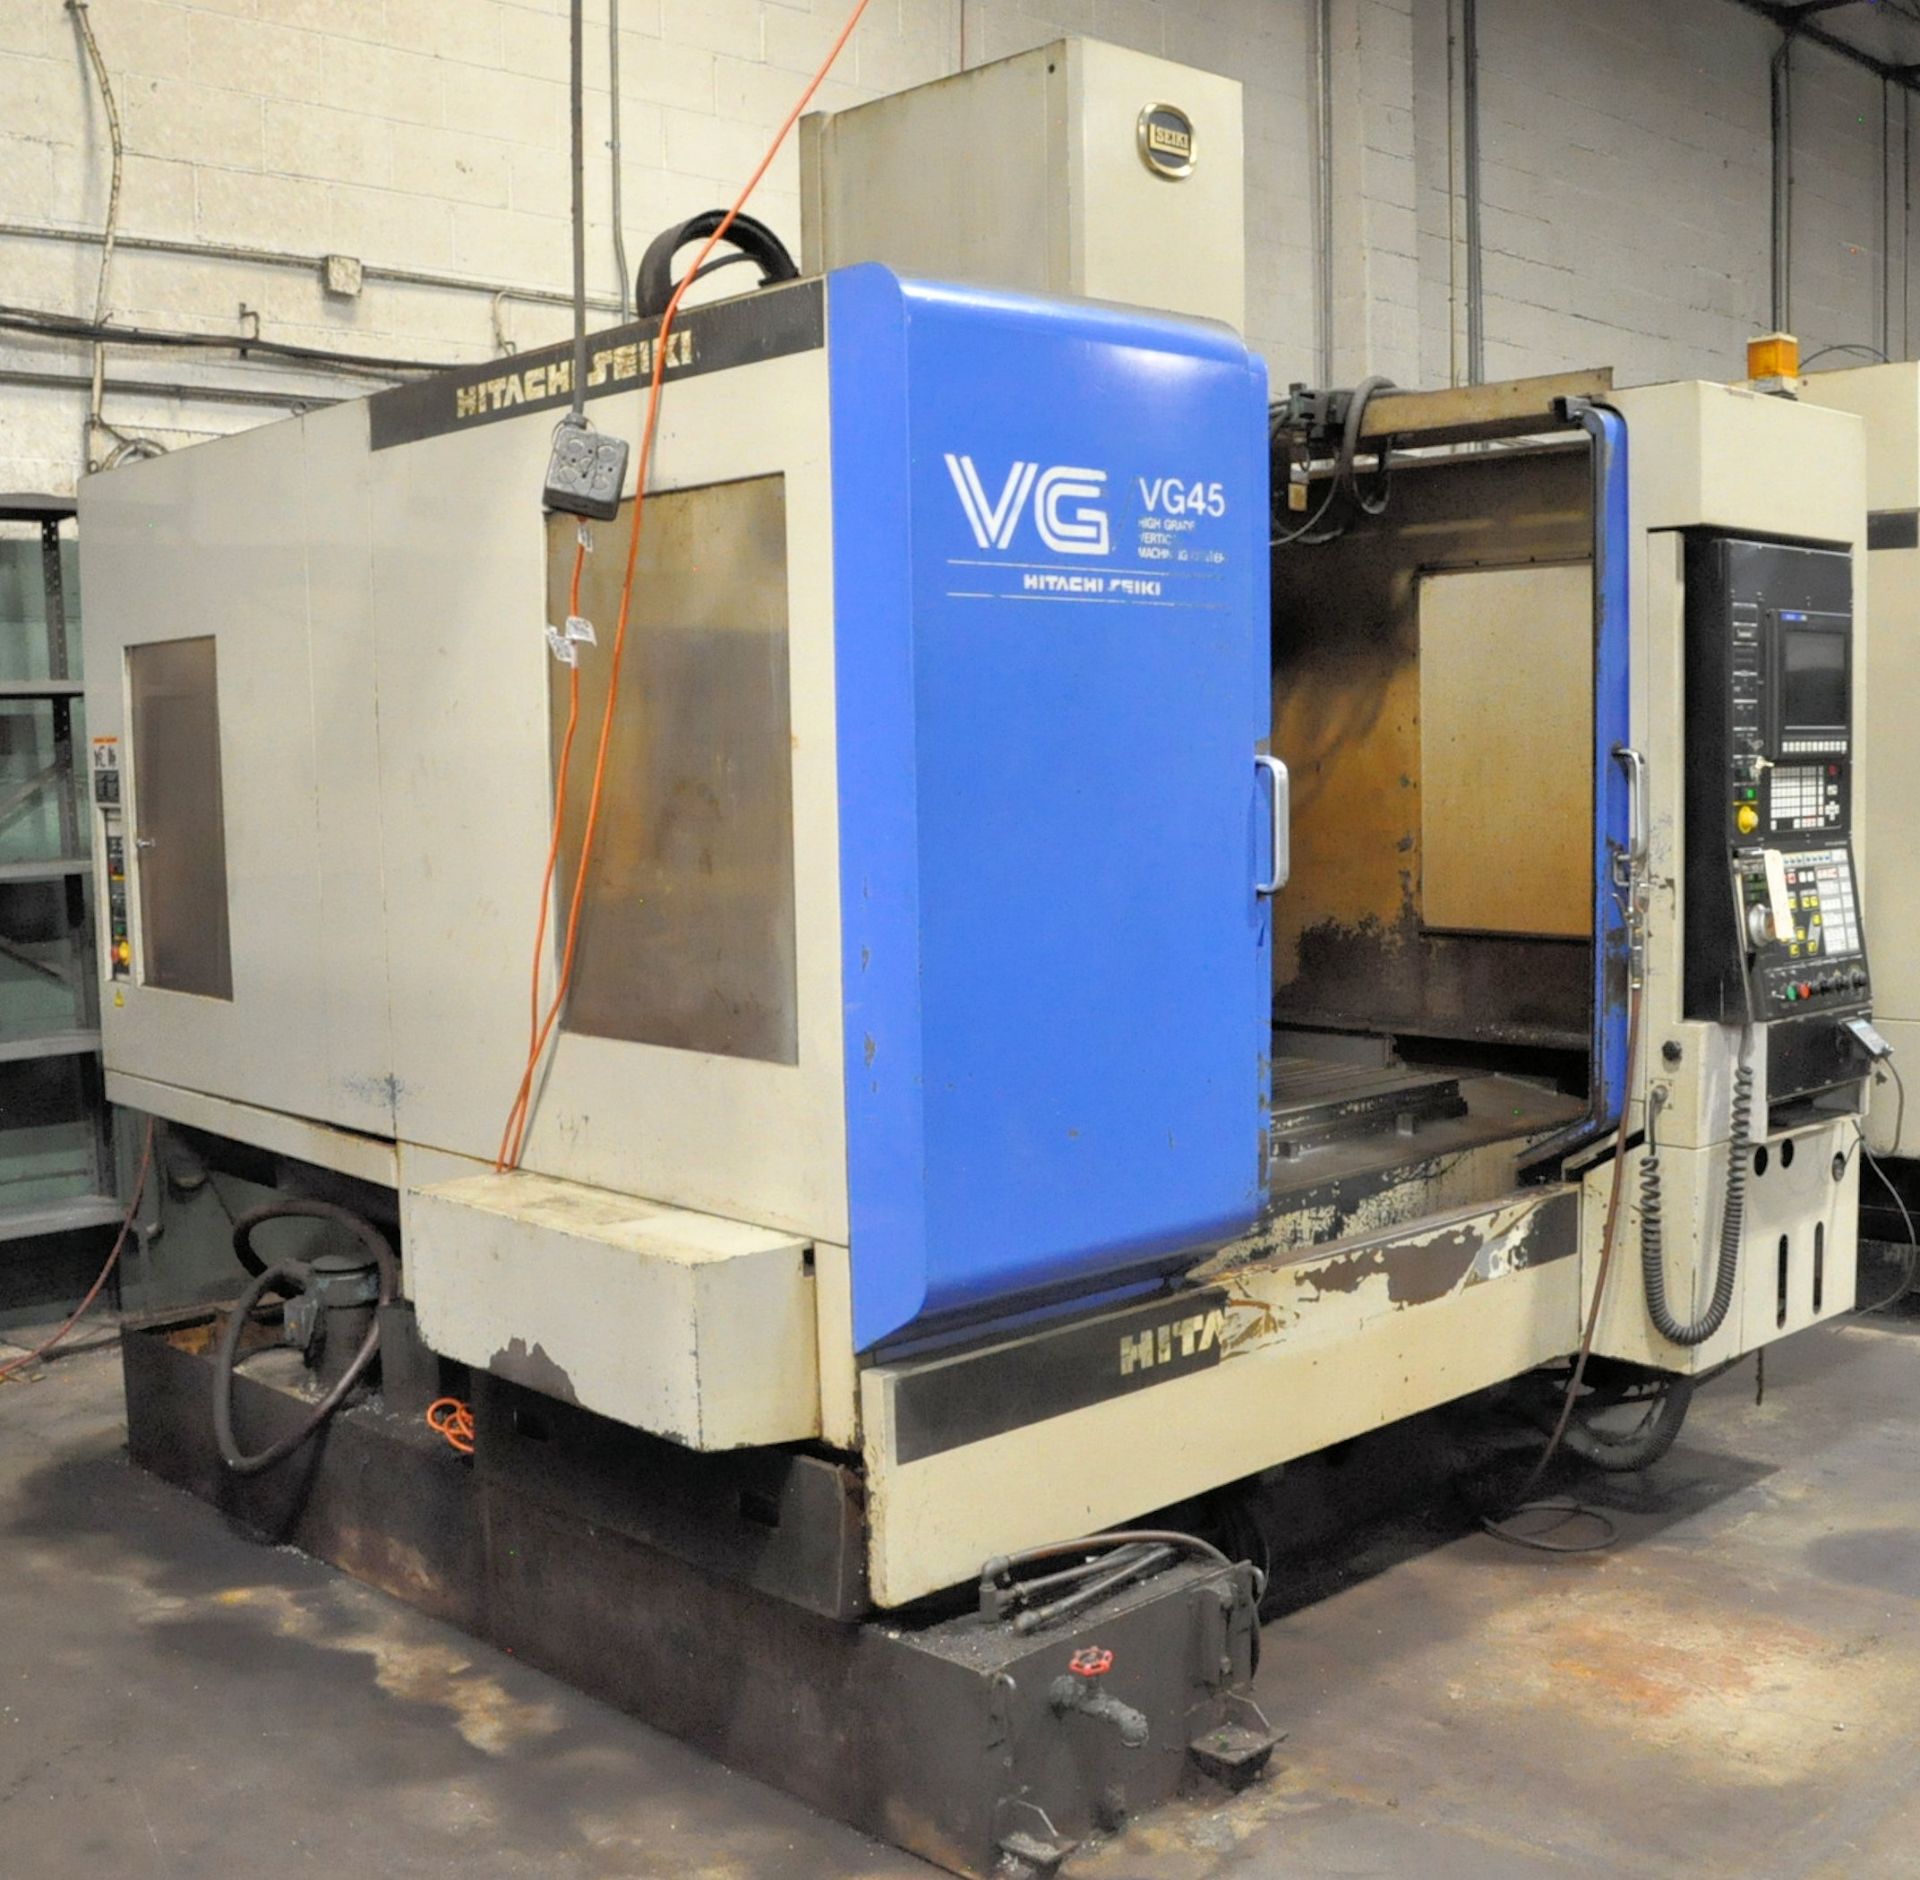 Hitachi-Seiki Model VG45, CNC Vertical Machining Center, S/n VG-45042, 20-Automatic Tool Changer, - Image 3 of 7